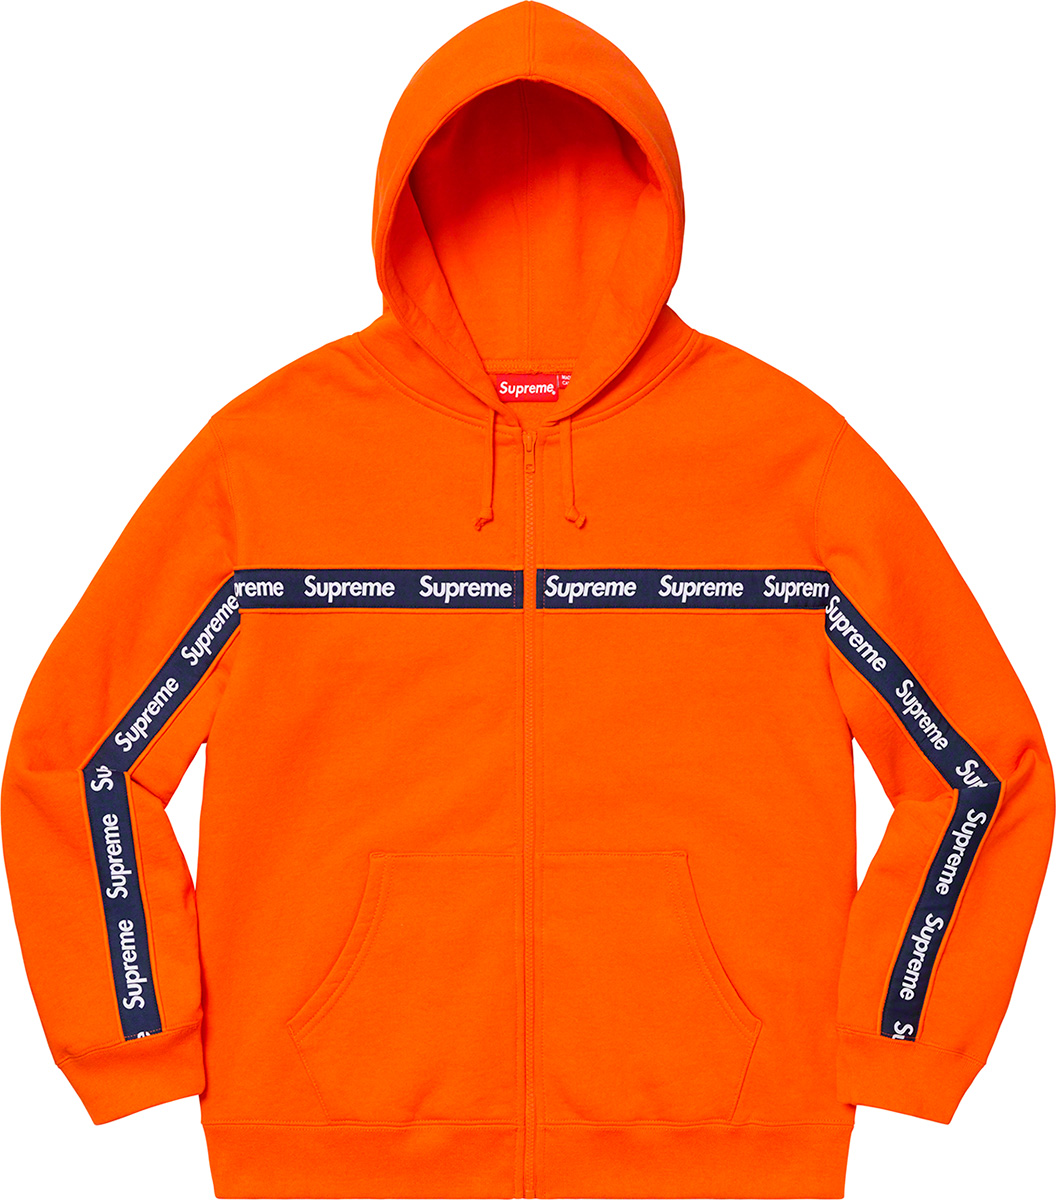 supreme Text Stripe Zip Up Hooded